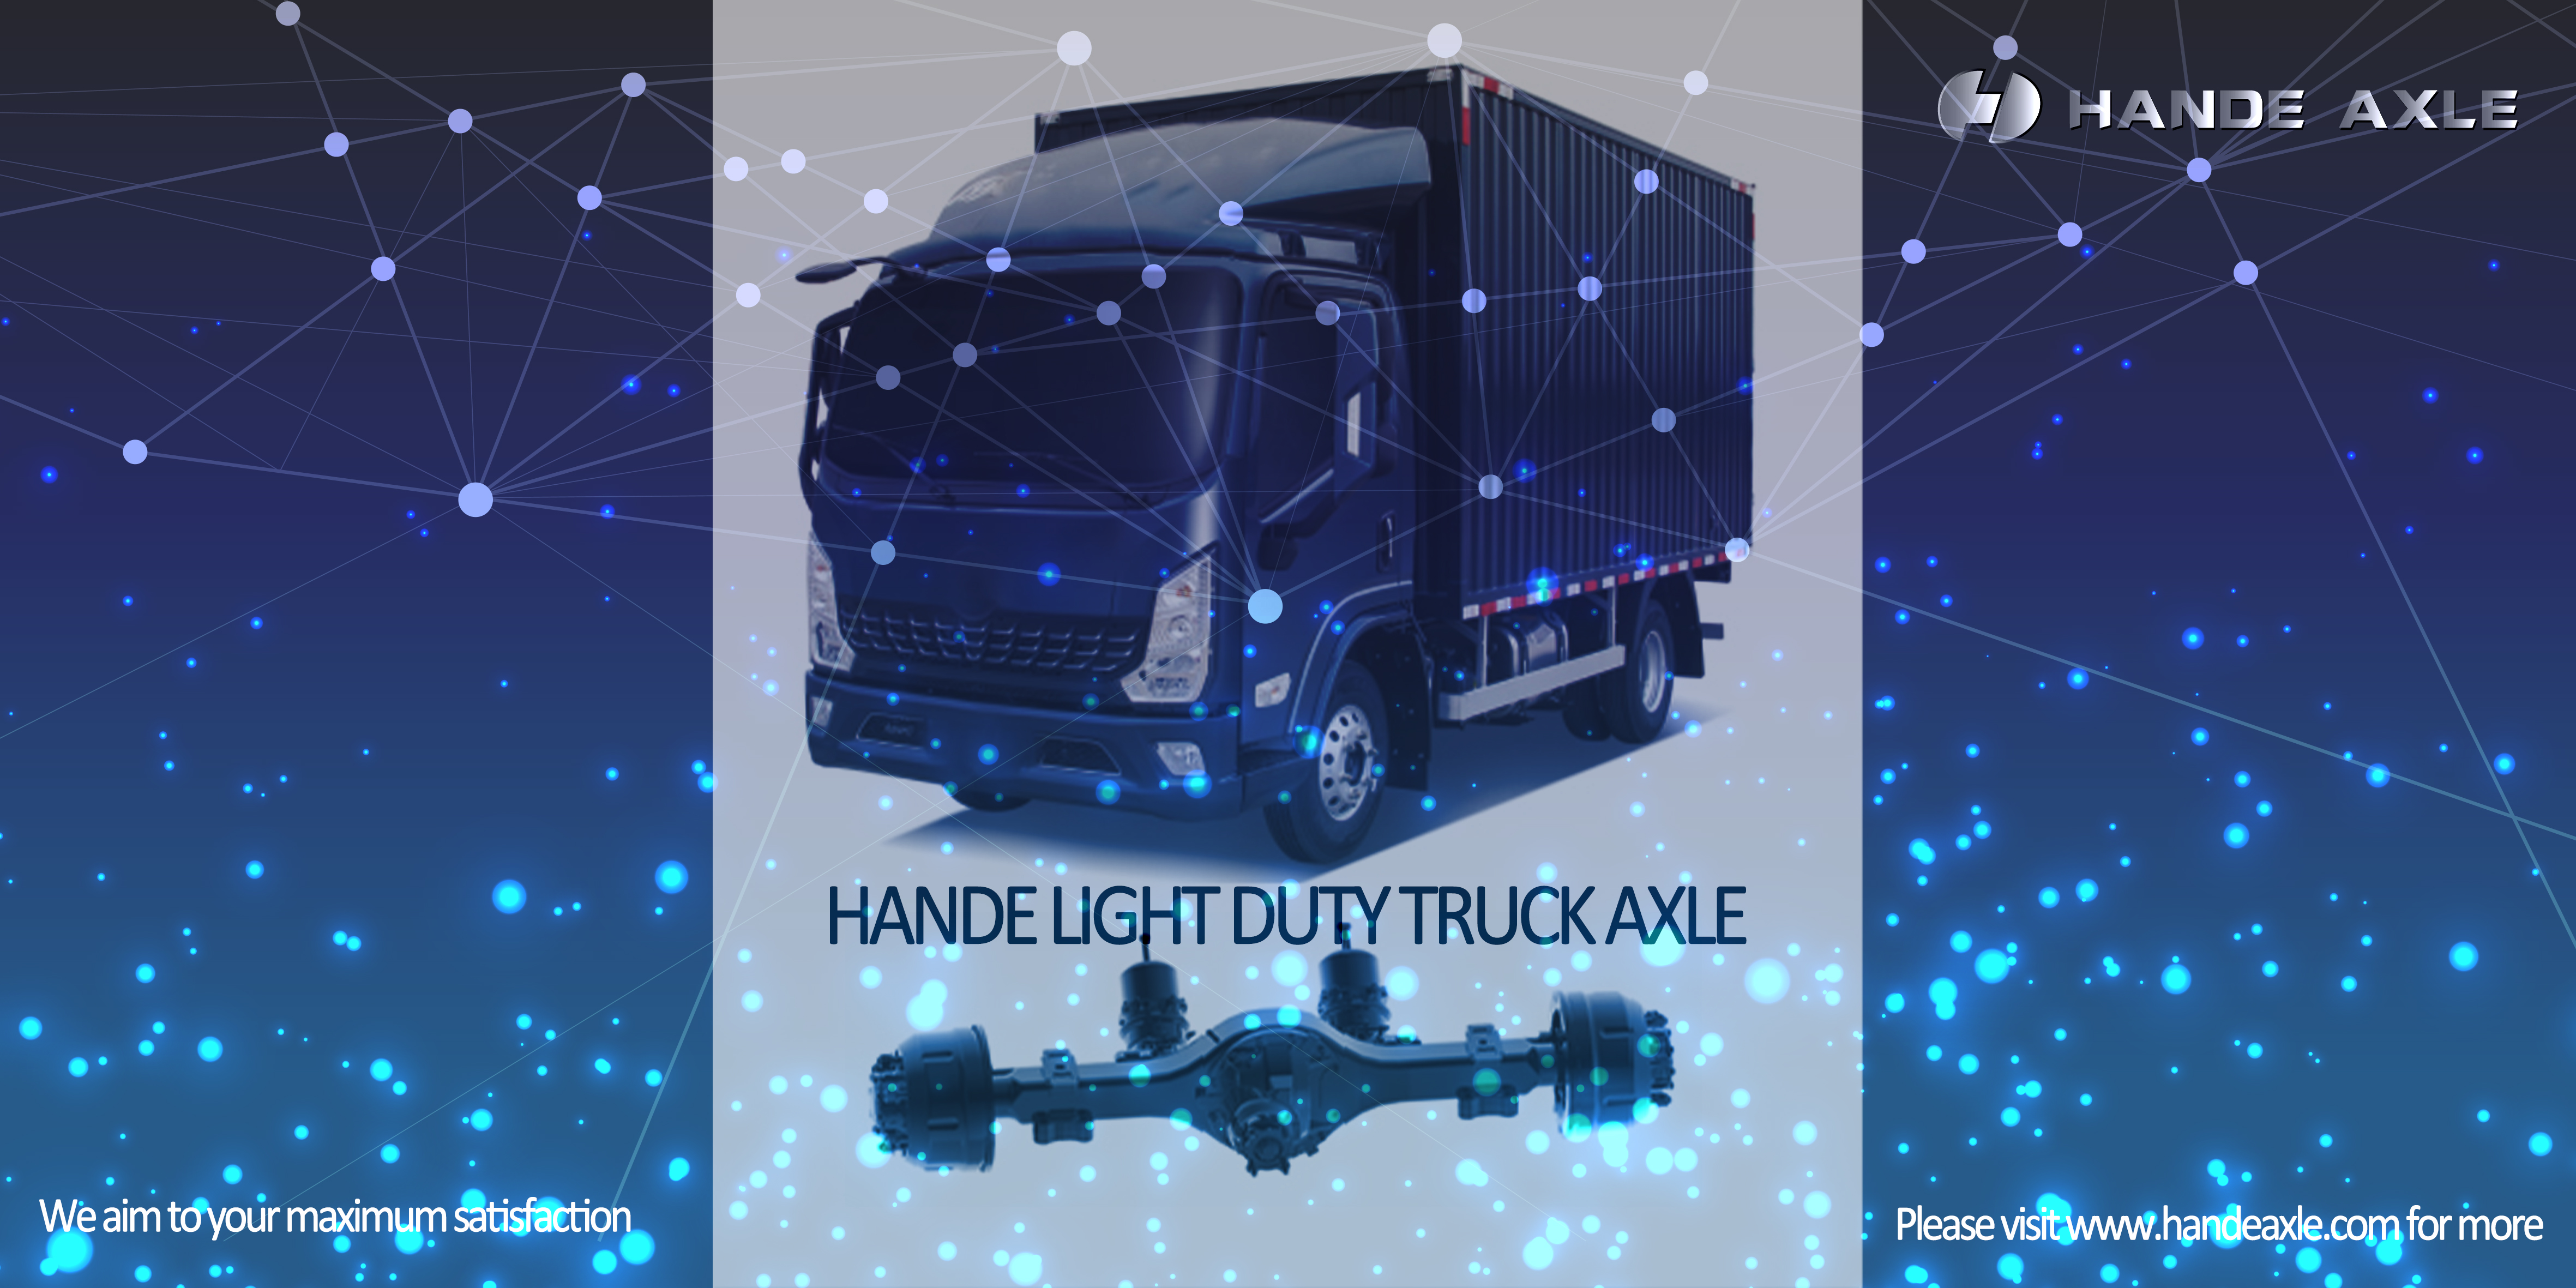 HanDe Light Duty Truck Axle Applied to hot-selling vehicles of a well-known OEM in China